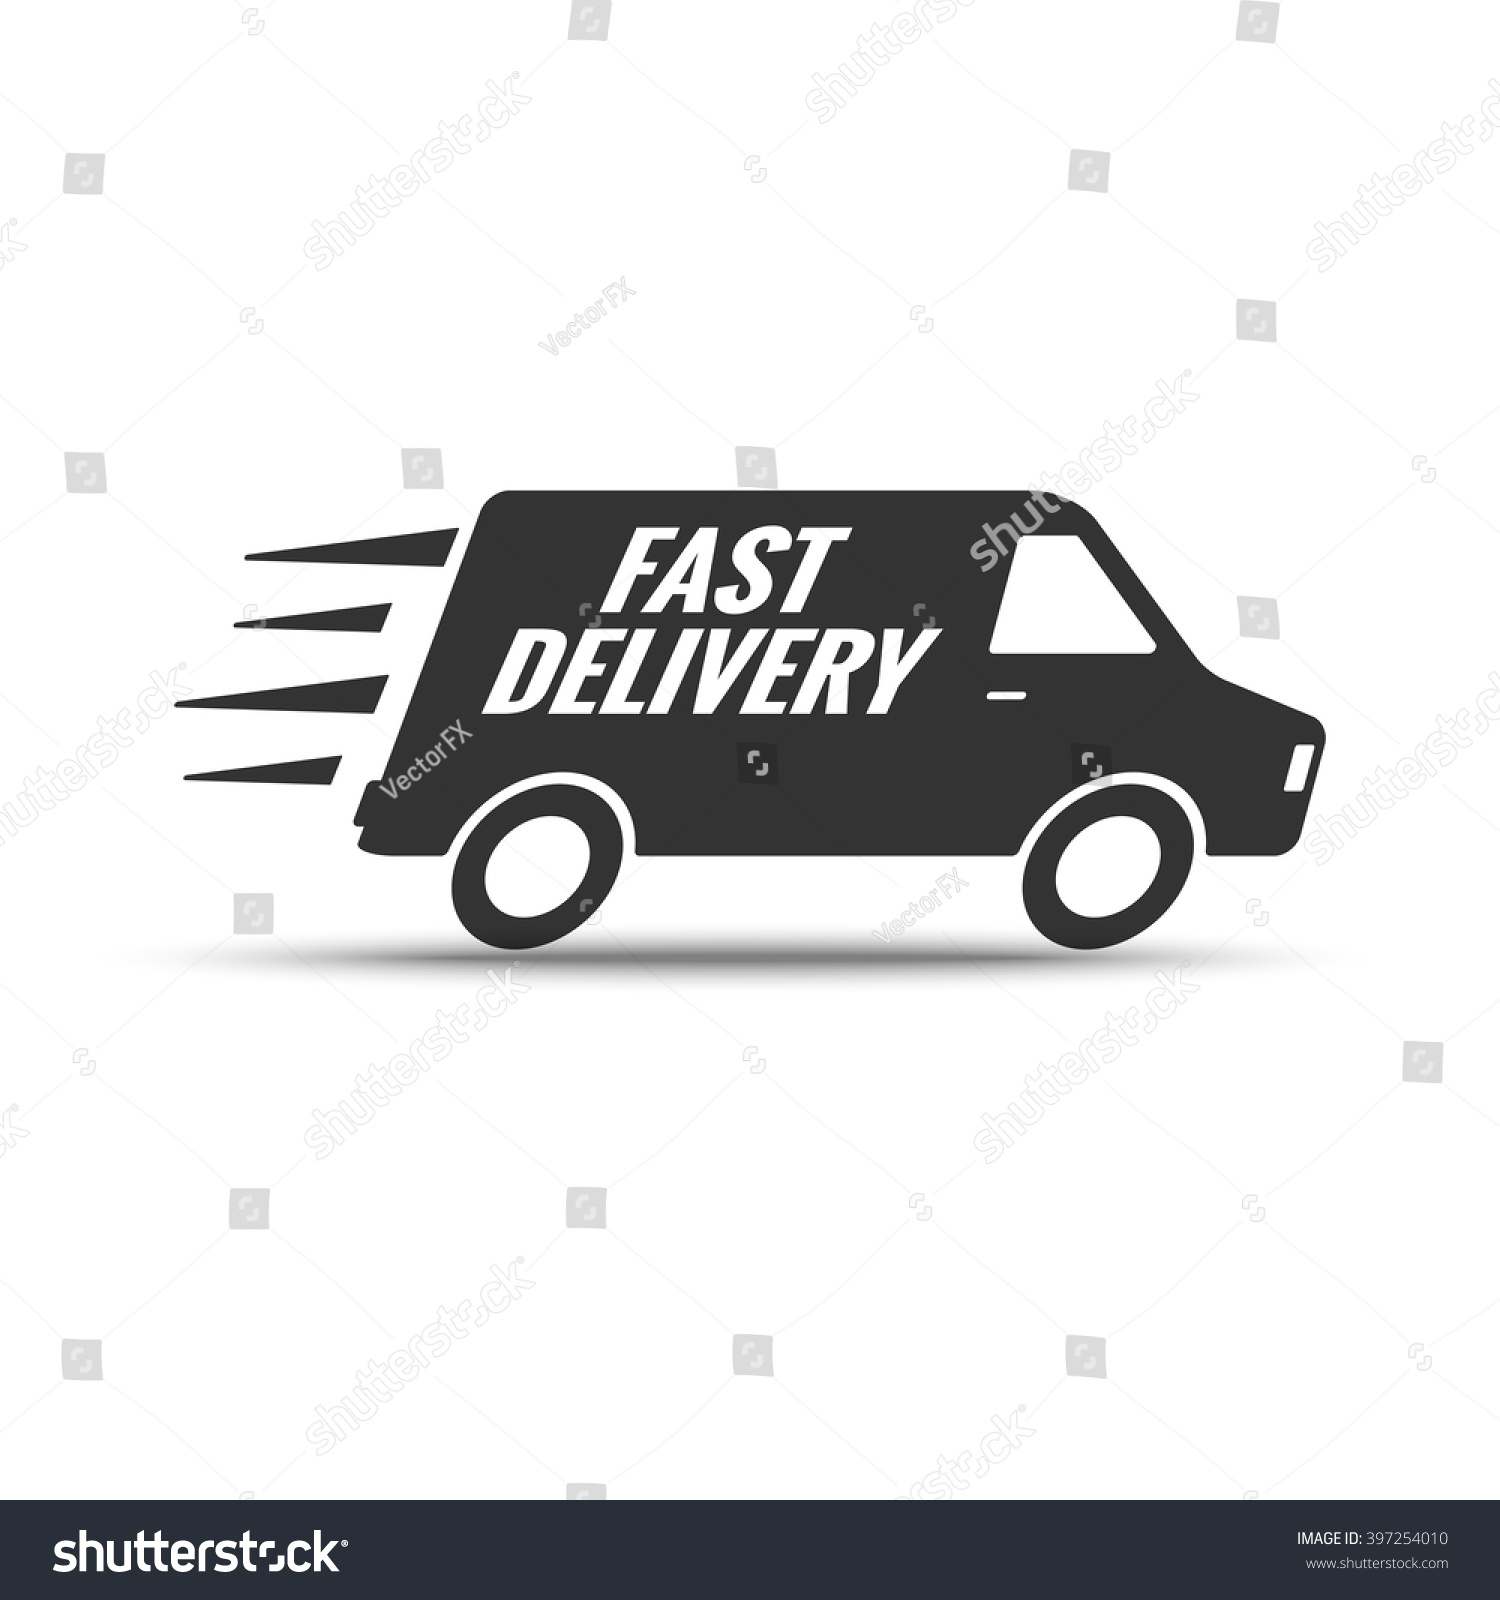 Fast Delivery. Shipping Truck Silhouette. Fast Speed Transportation ...